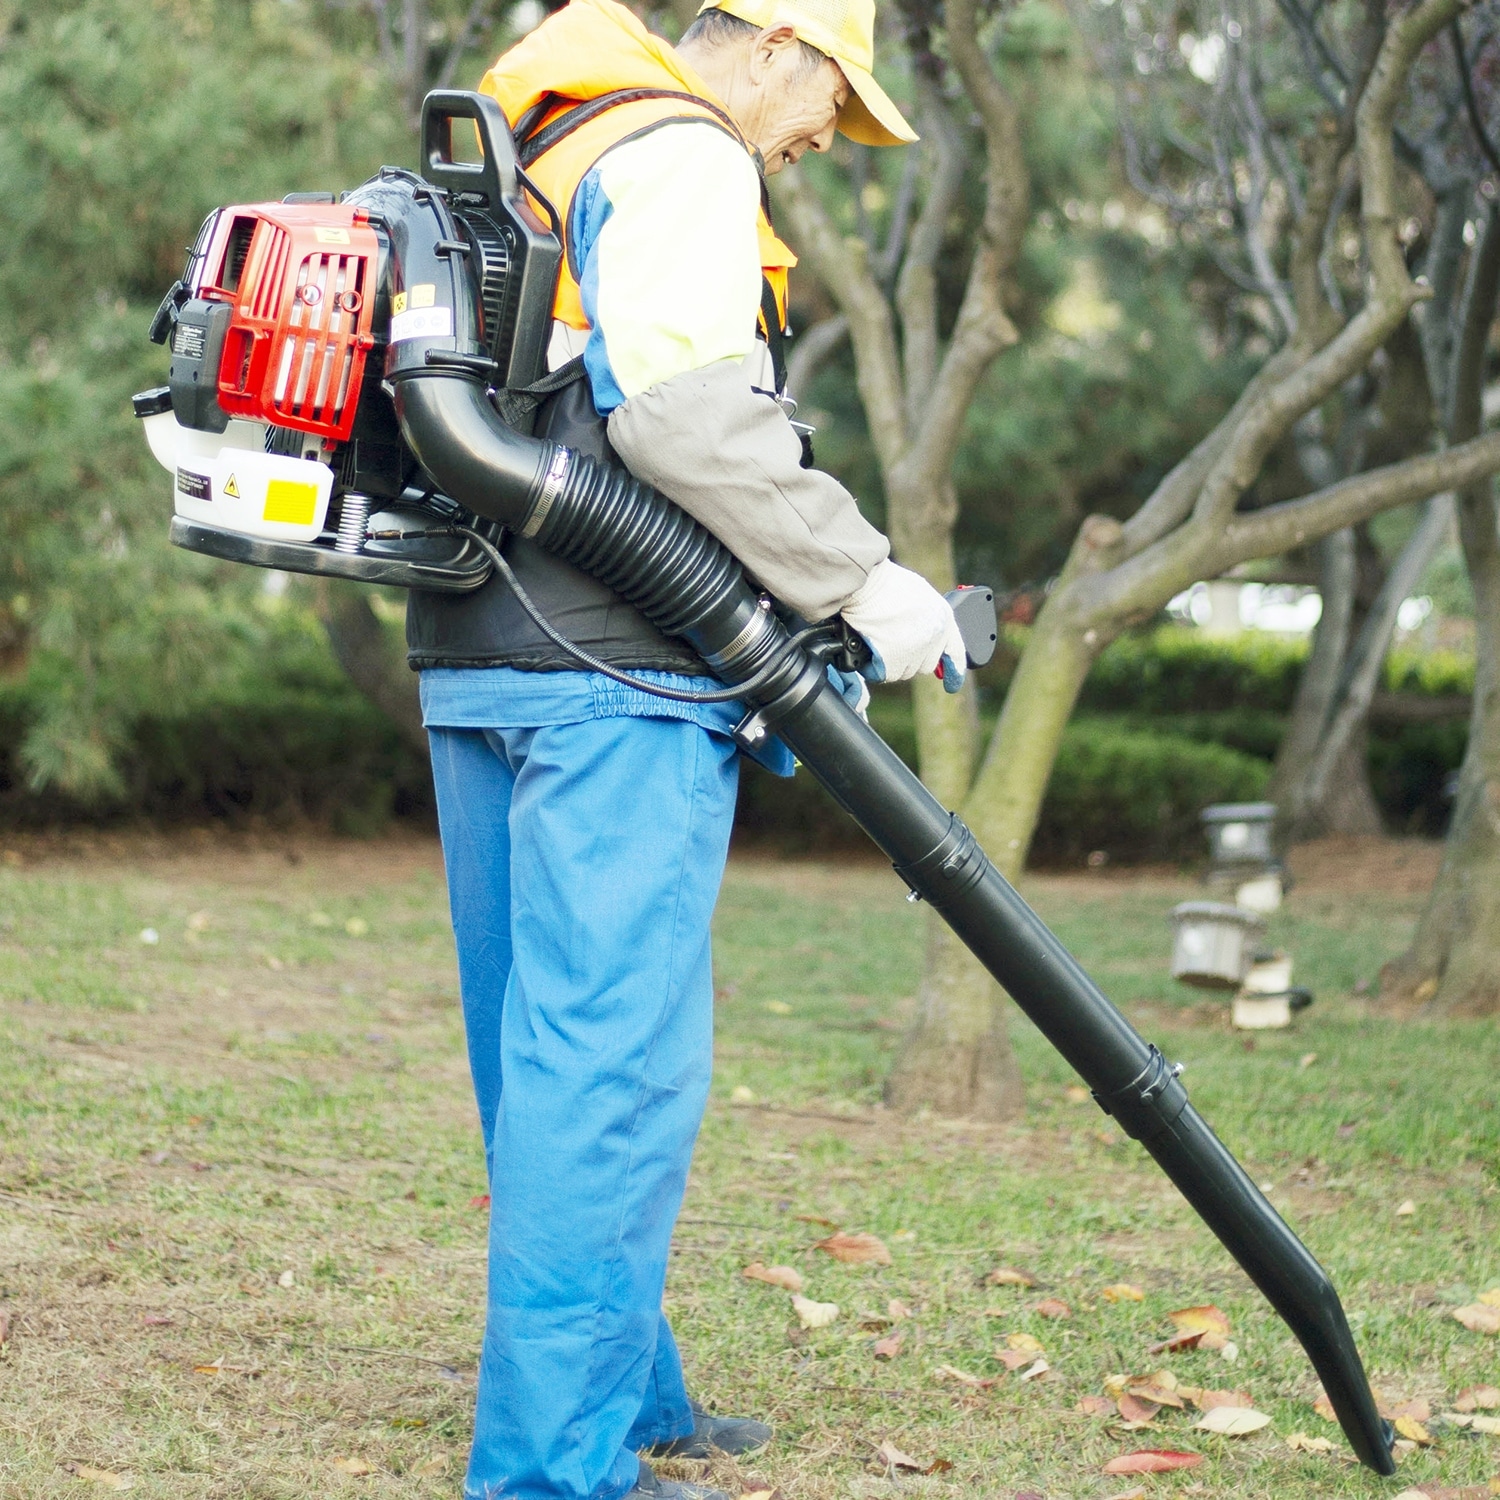 https://ak1.ostkcdn.com/images/products/is/images/direct/10b5d1b7456c0e00f5088c426d30246f6549fa3b/Backpack-Leaf-Blower-52CC-2-Cycle-Gas-Cordless-Leaf-Blower-with-extention-tube-for-Big-Yard.jpg